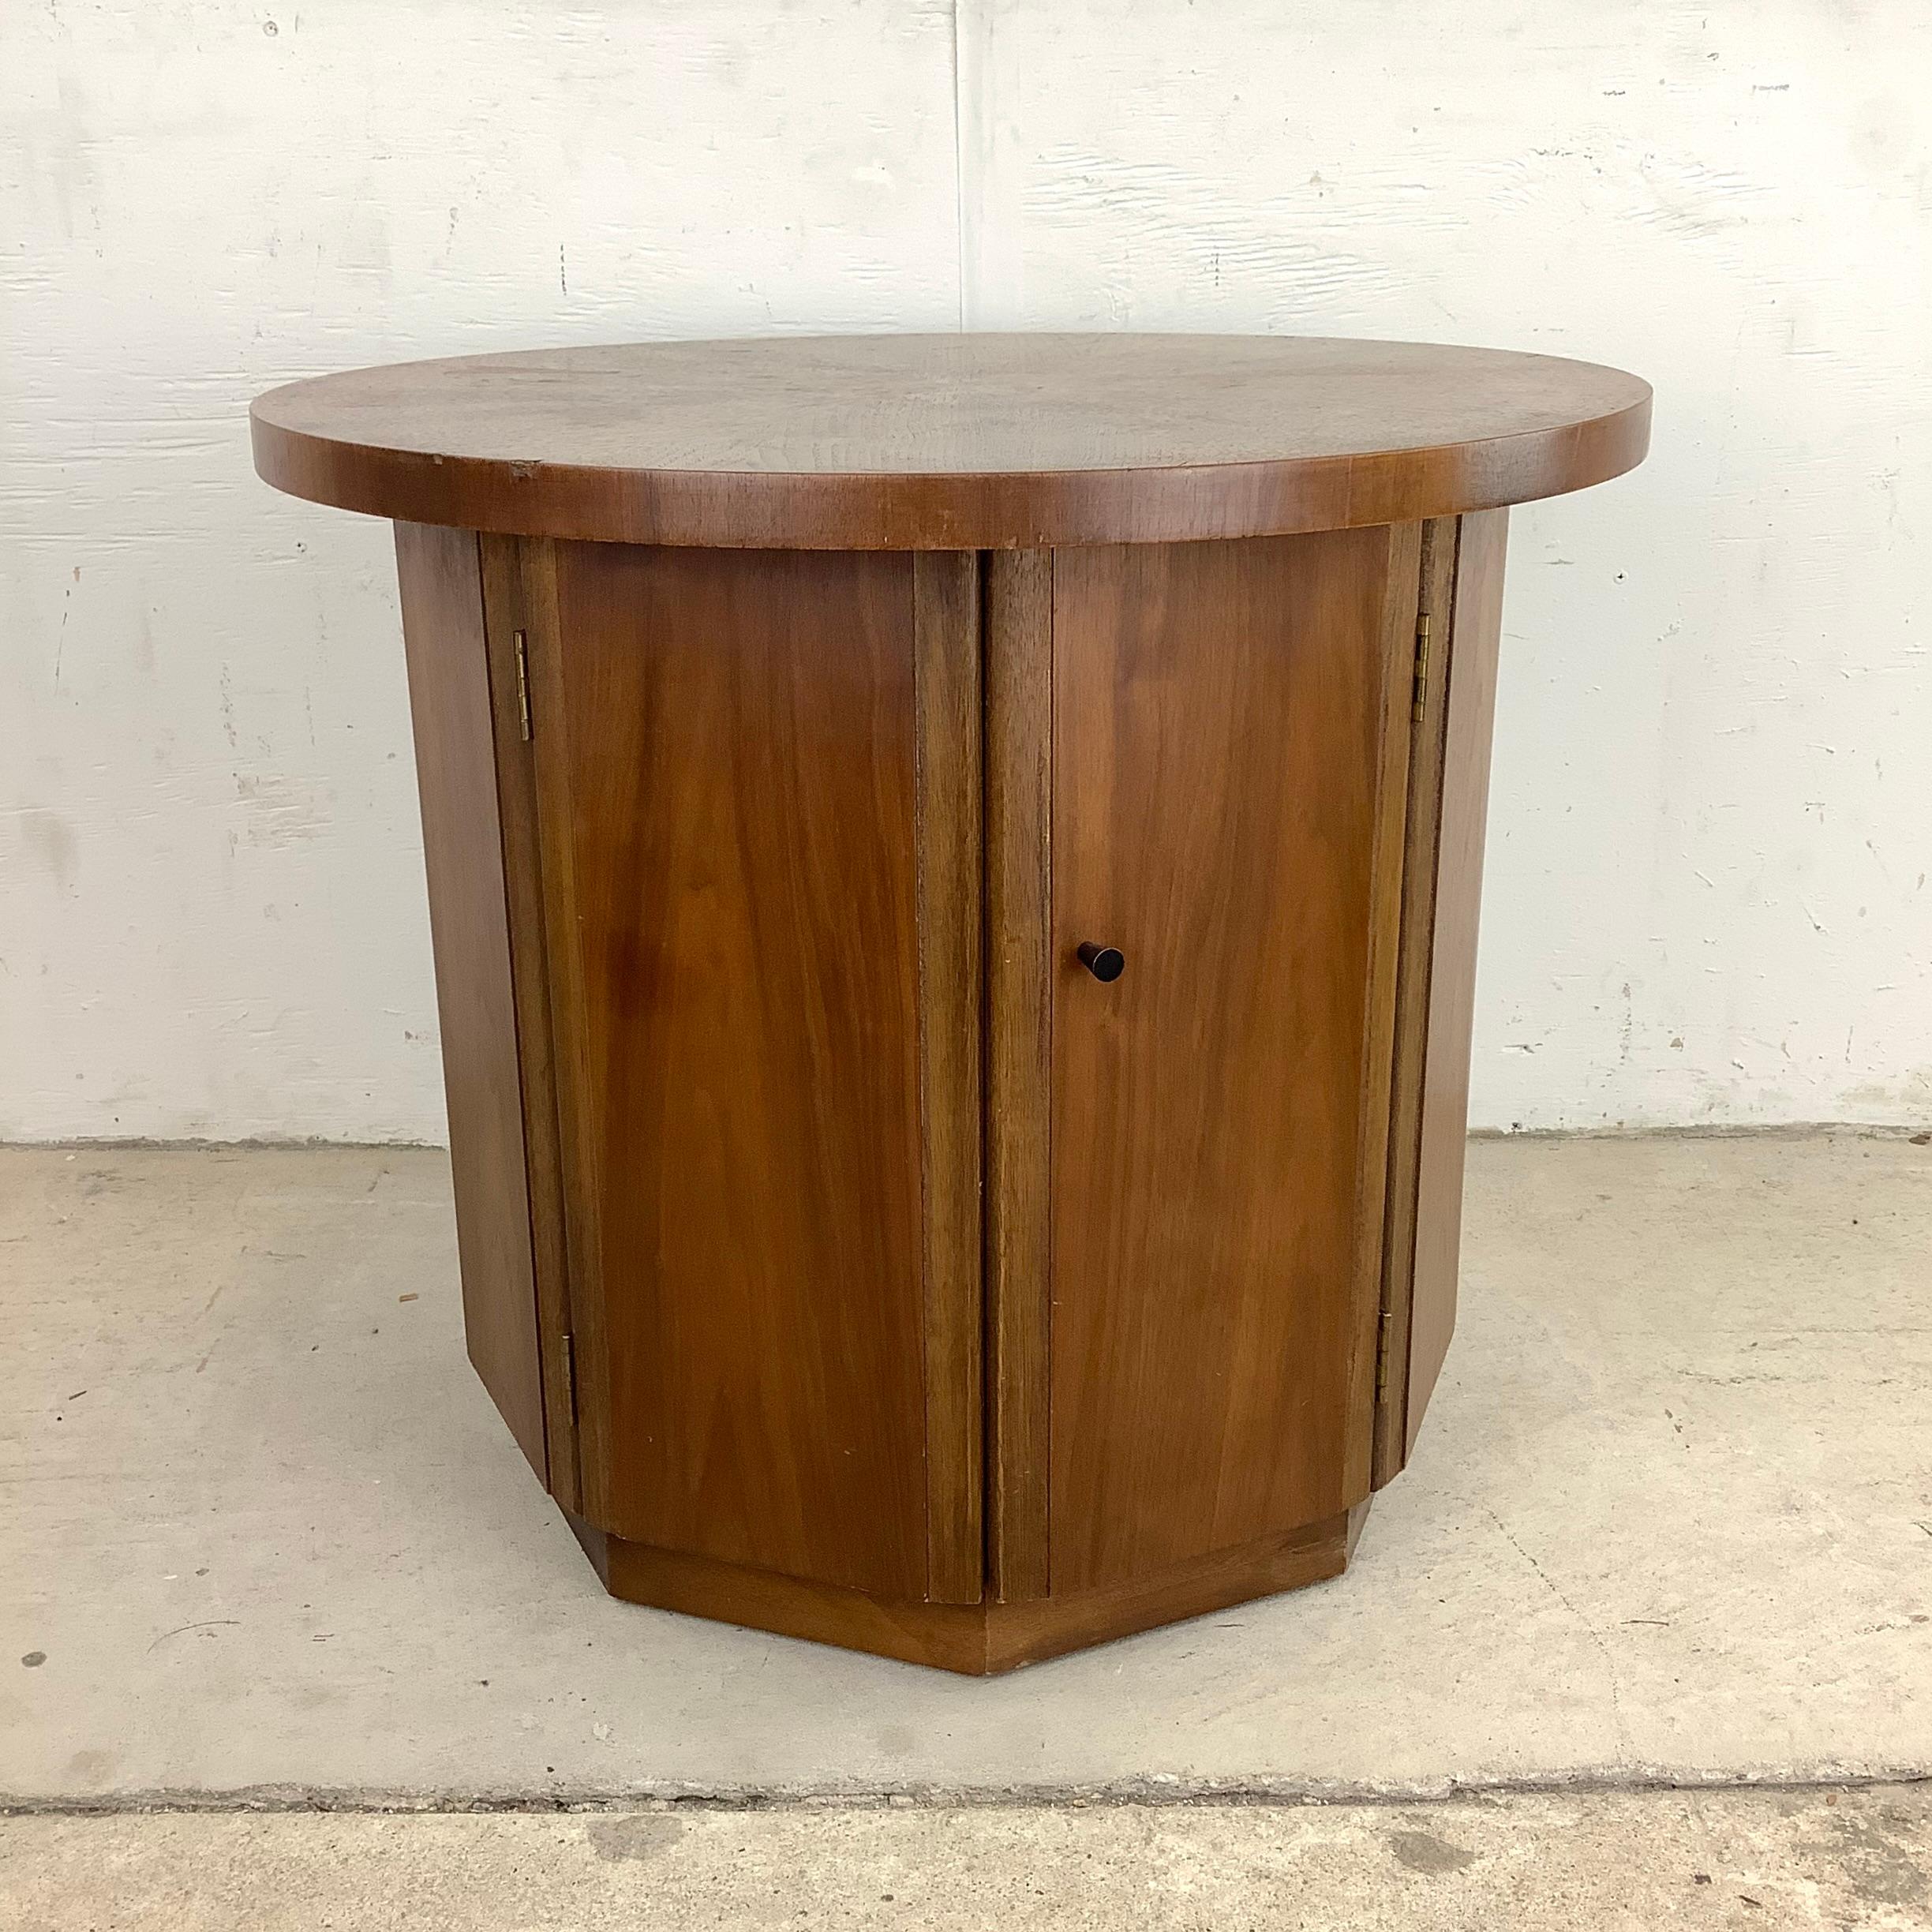 Introducing the Mid-Century Modern Circular Walnut End Table, a stylish and versatile addition to your living space. Crafted with the iconic design elements of the mid-century era, this end table combines sleek lines, warm walnut wood, and a